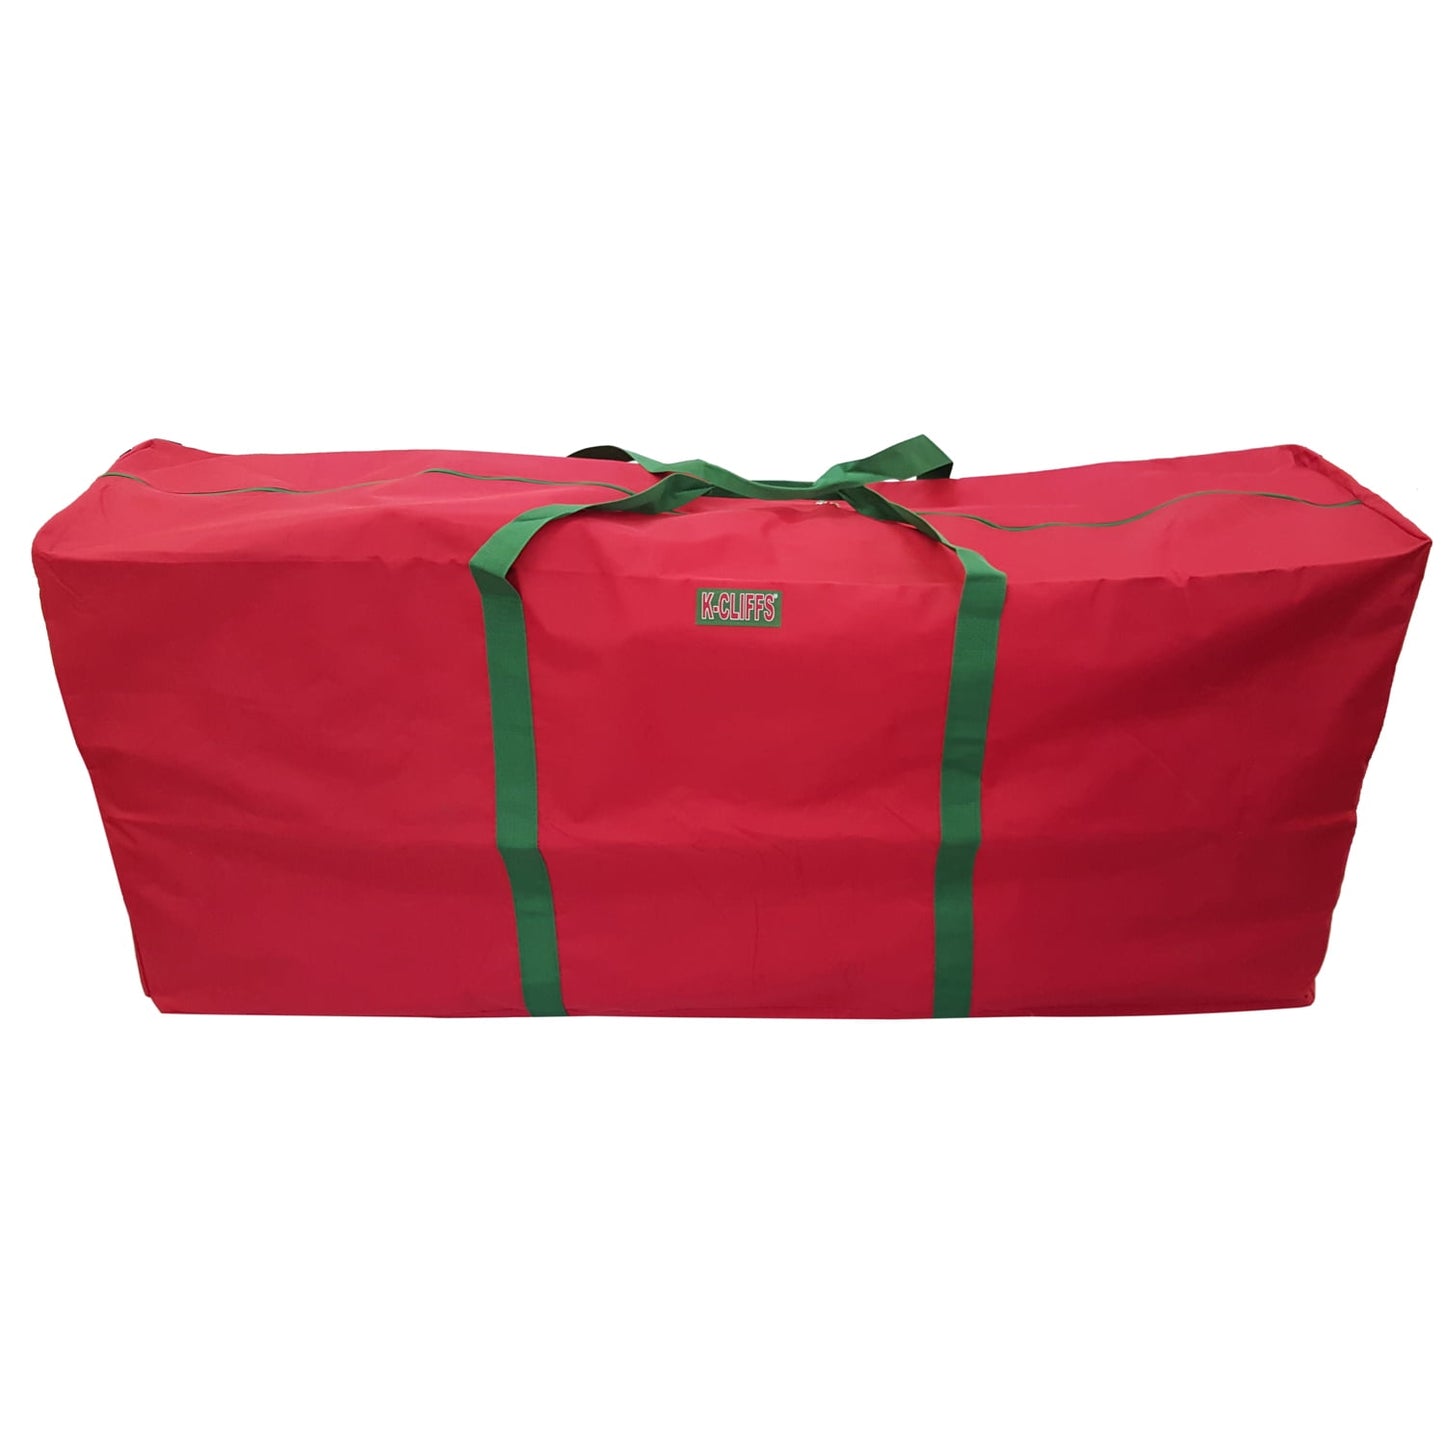 K-cliffs Heavy Duty Christmas Tree Storage Bag Fits up to 9 Foot Tree, Red Extra Large 65inch